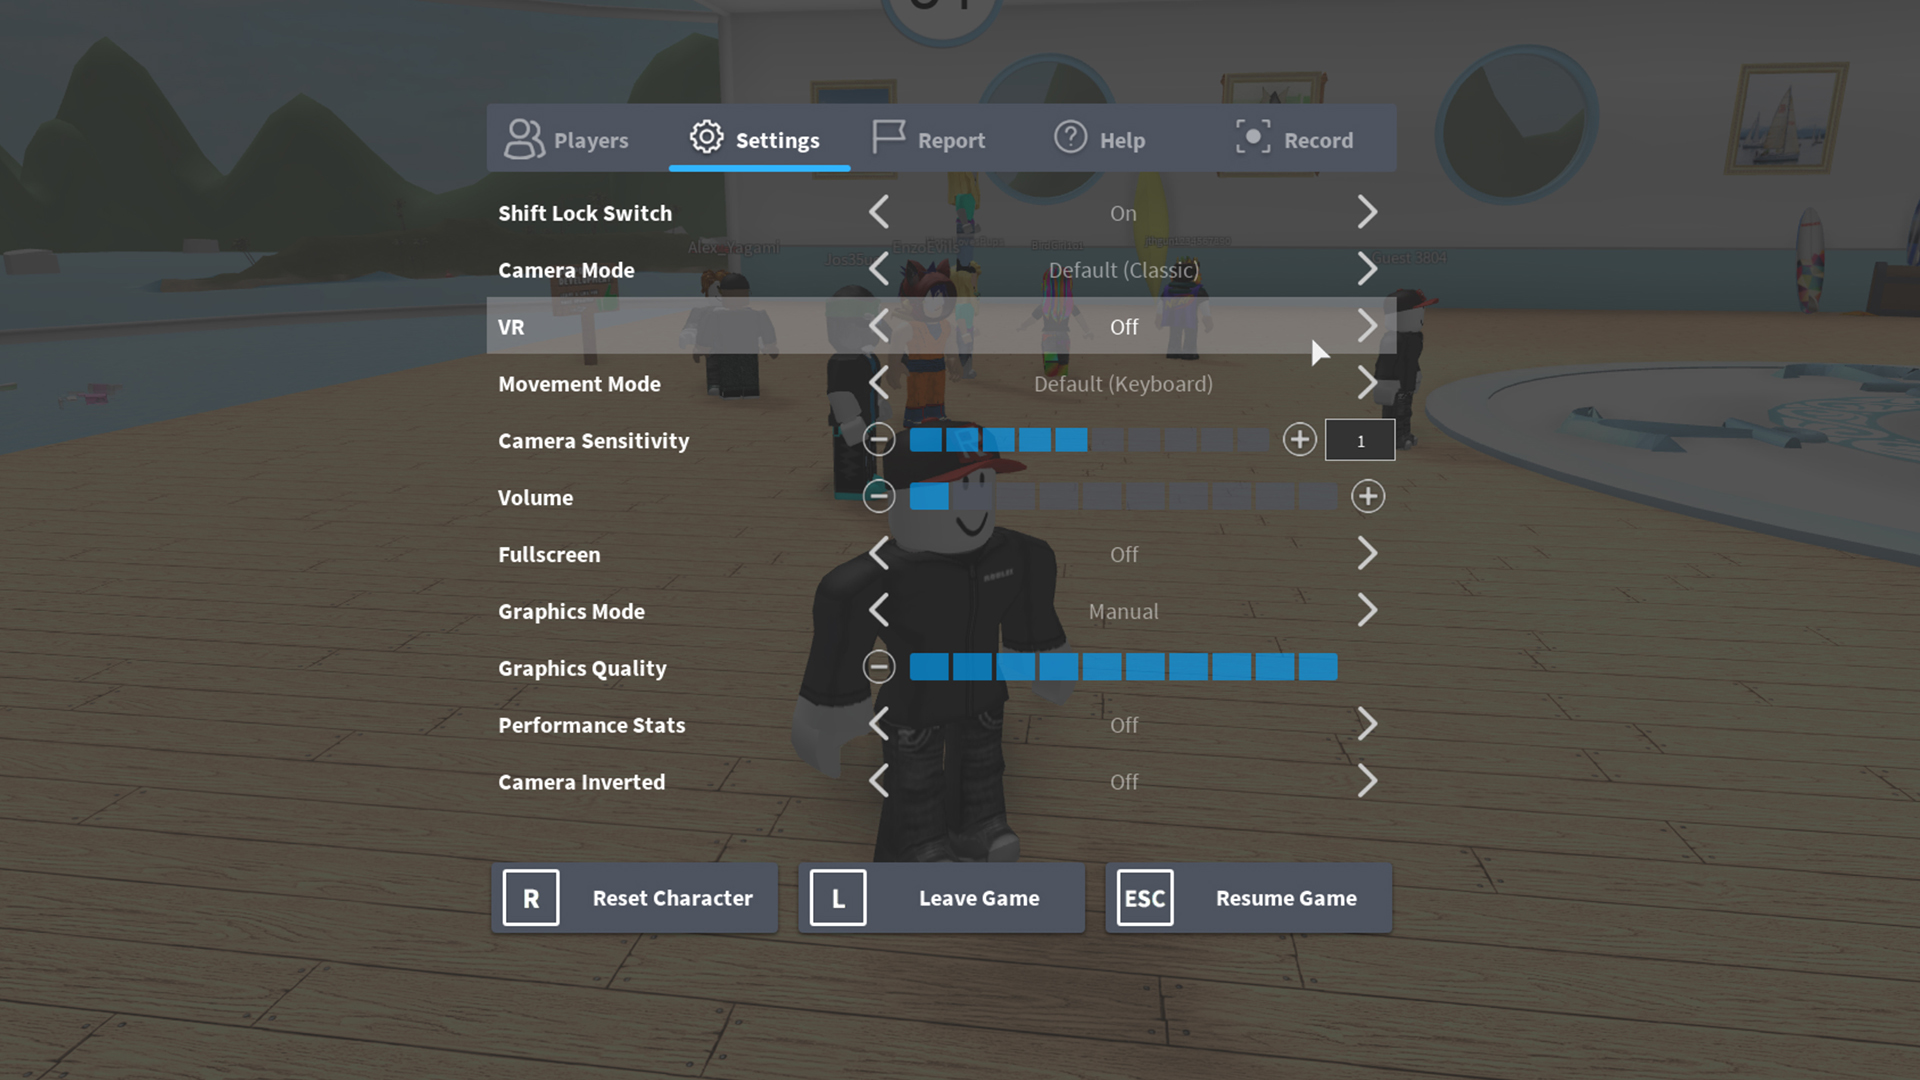 Setting up VR for Roblox – Roblox Support